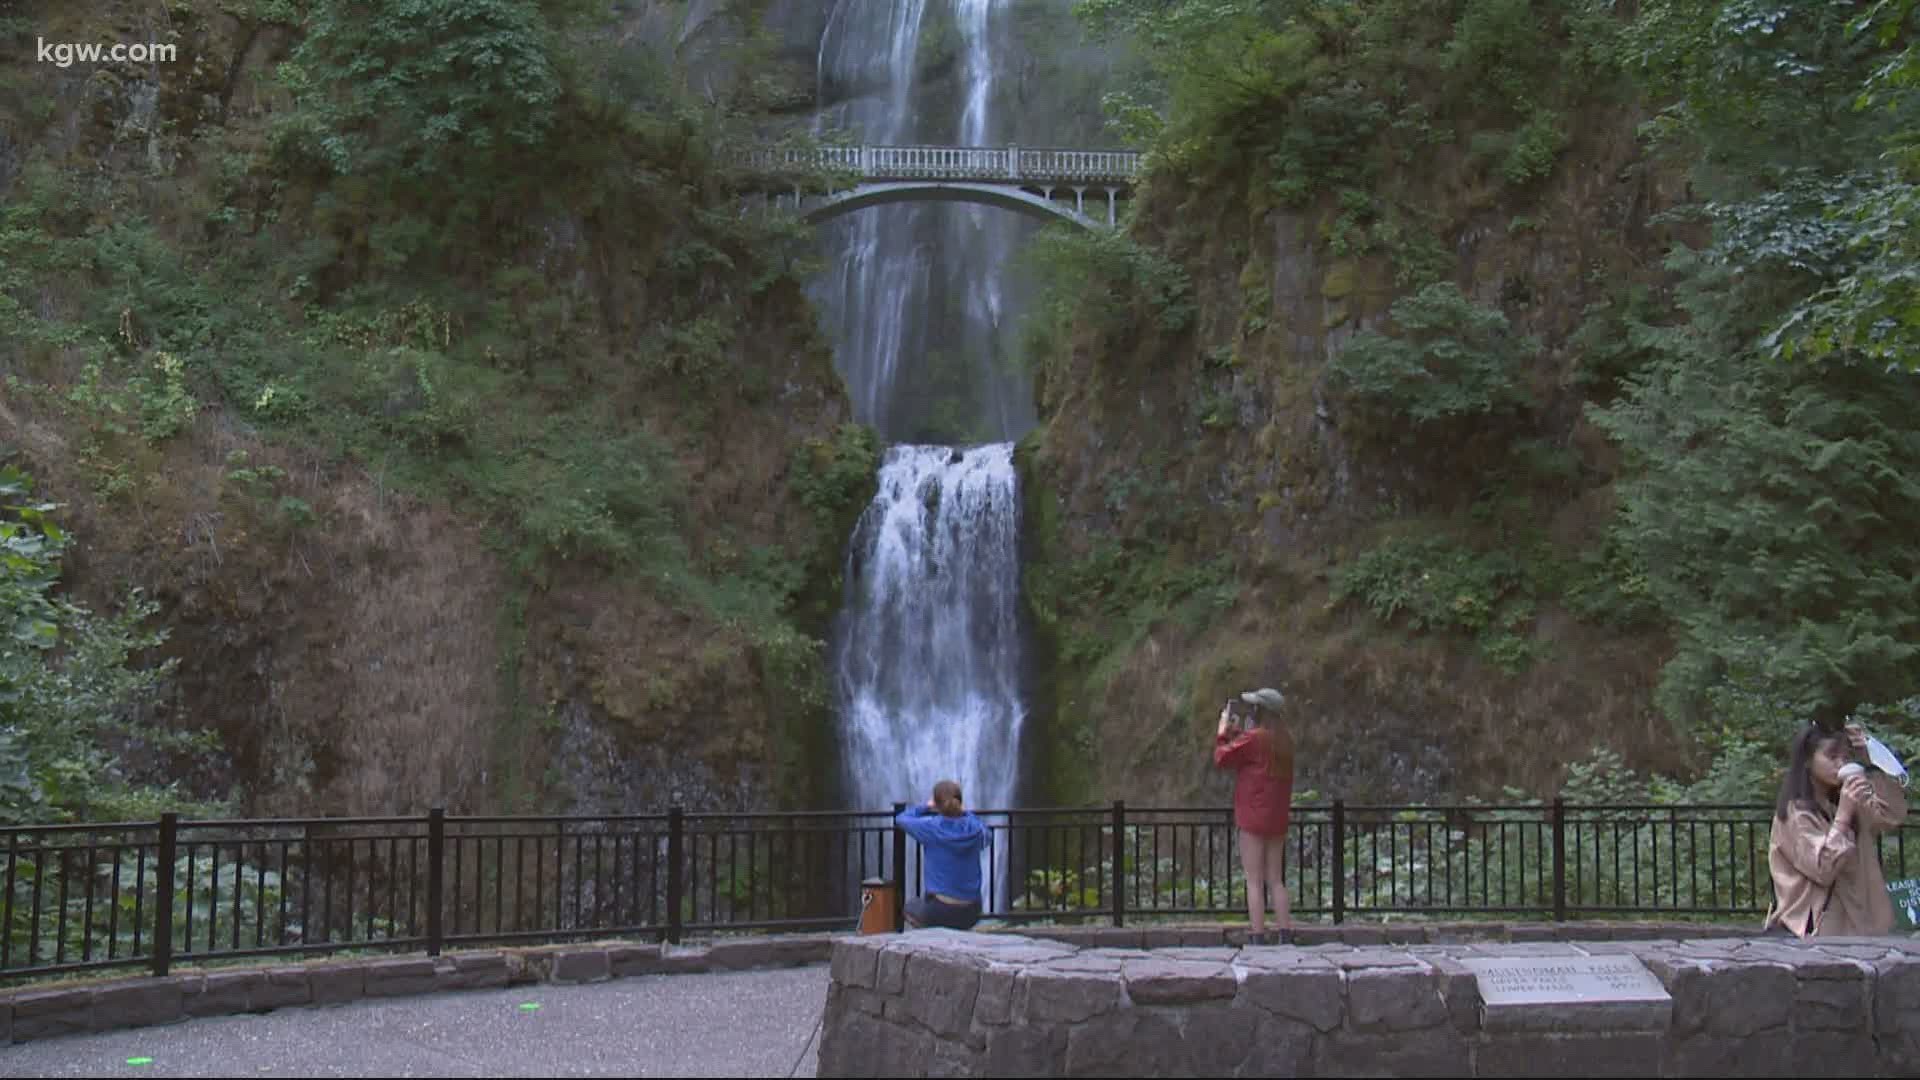 One of Oregon's most visited tourist destinations is back open after months of being shut down due to the pandemic.